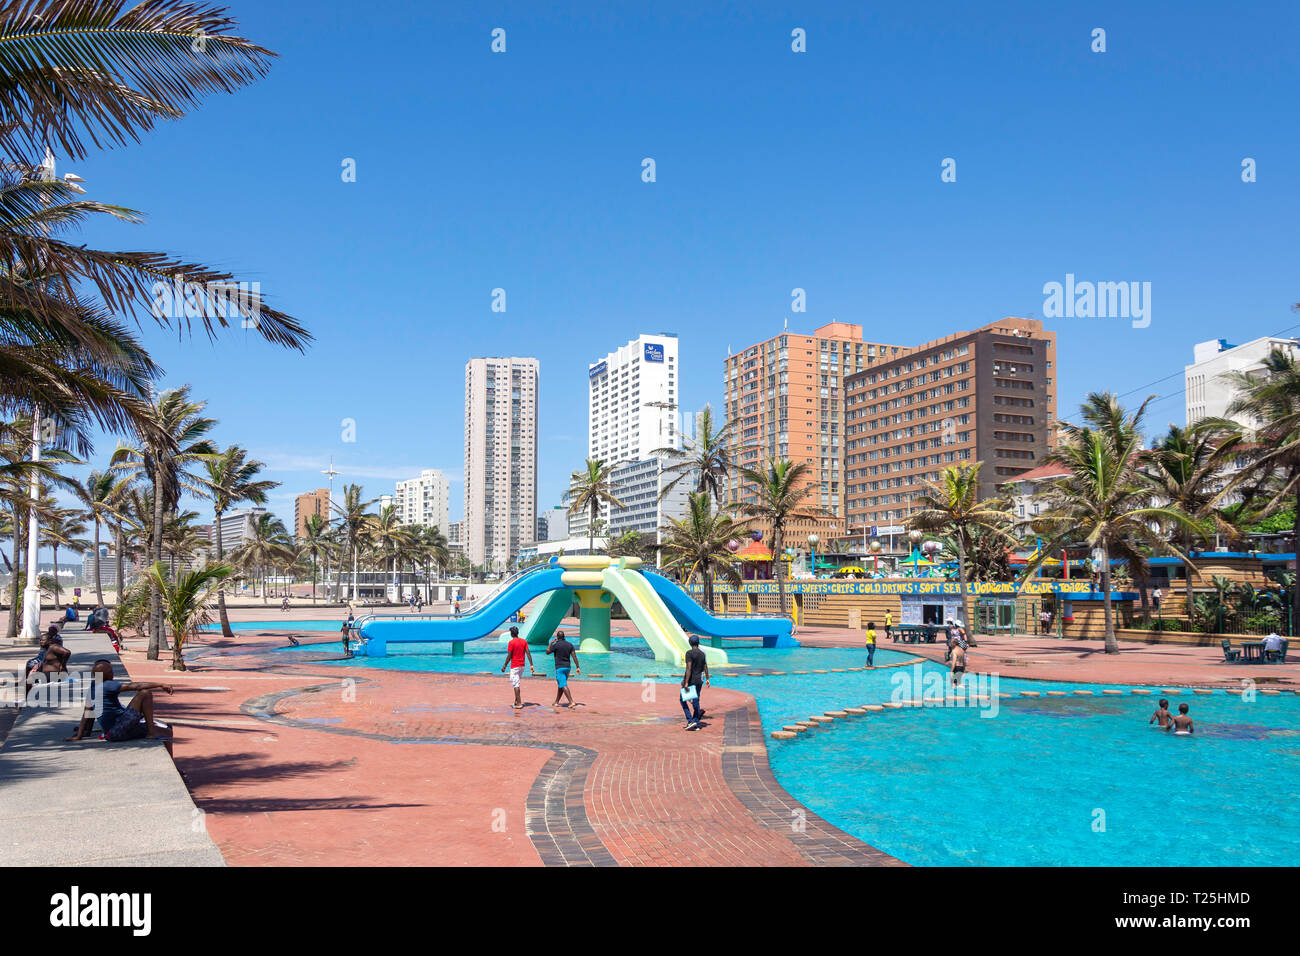 Children's swimming pool and play area on beach promenade, Snell Parade, New Beach, Durban, KwaZulu-Natal, South Africa Stock Photo